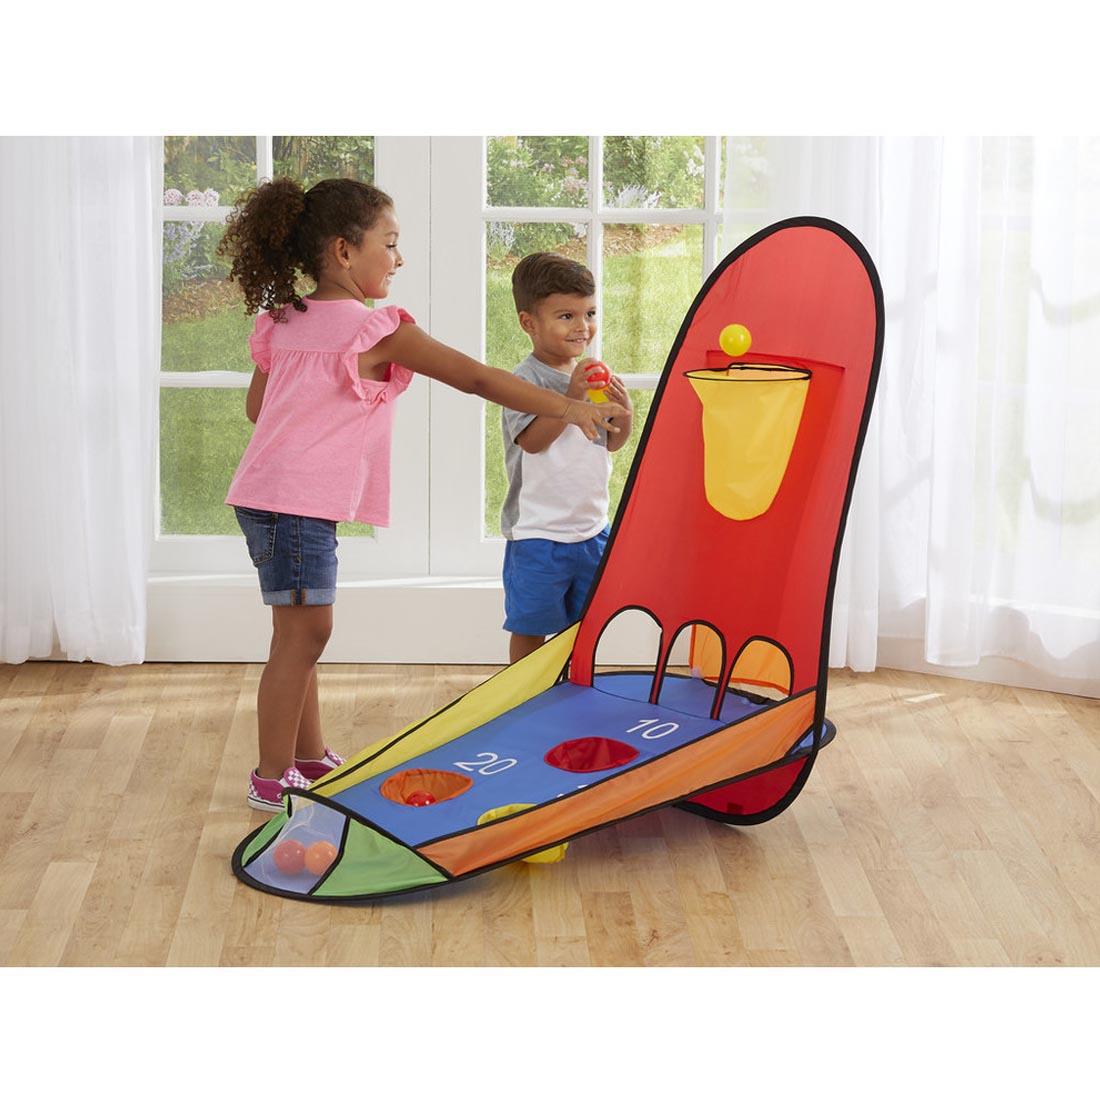 Two children playing with the Kidoozie Pop-Up Basketball Set